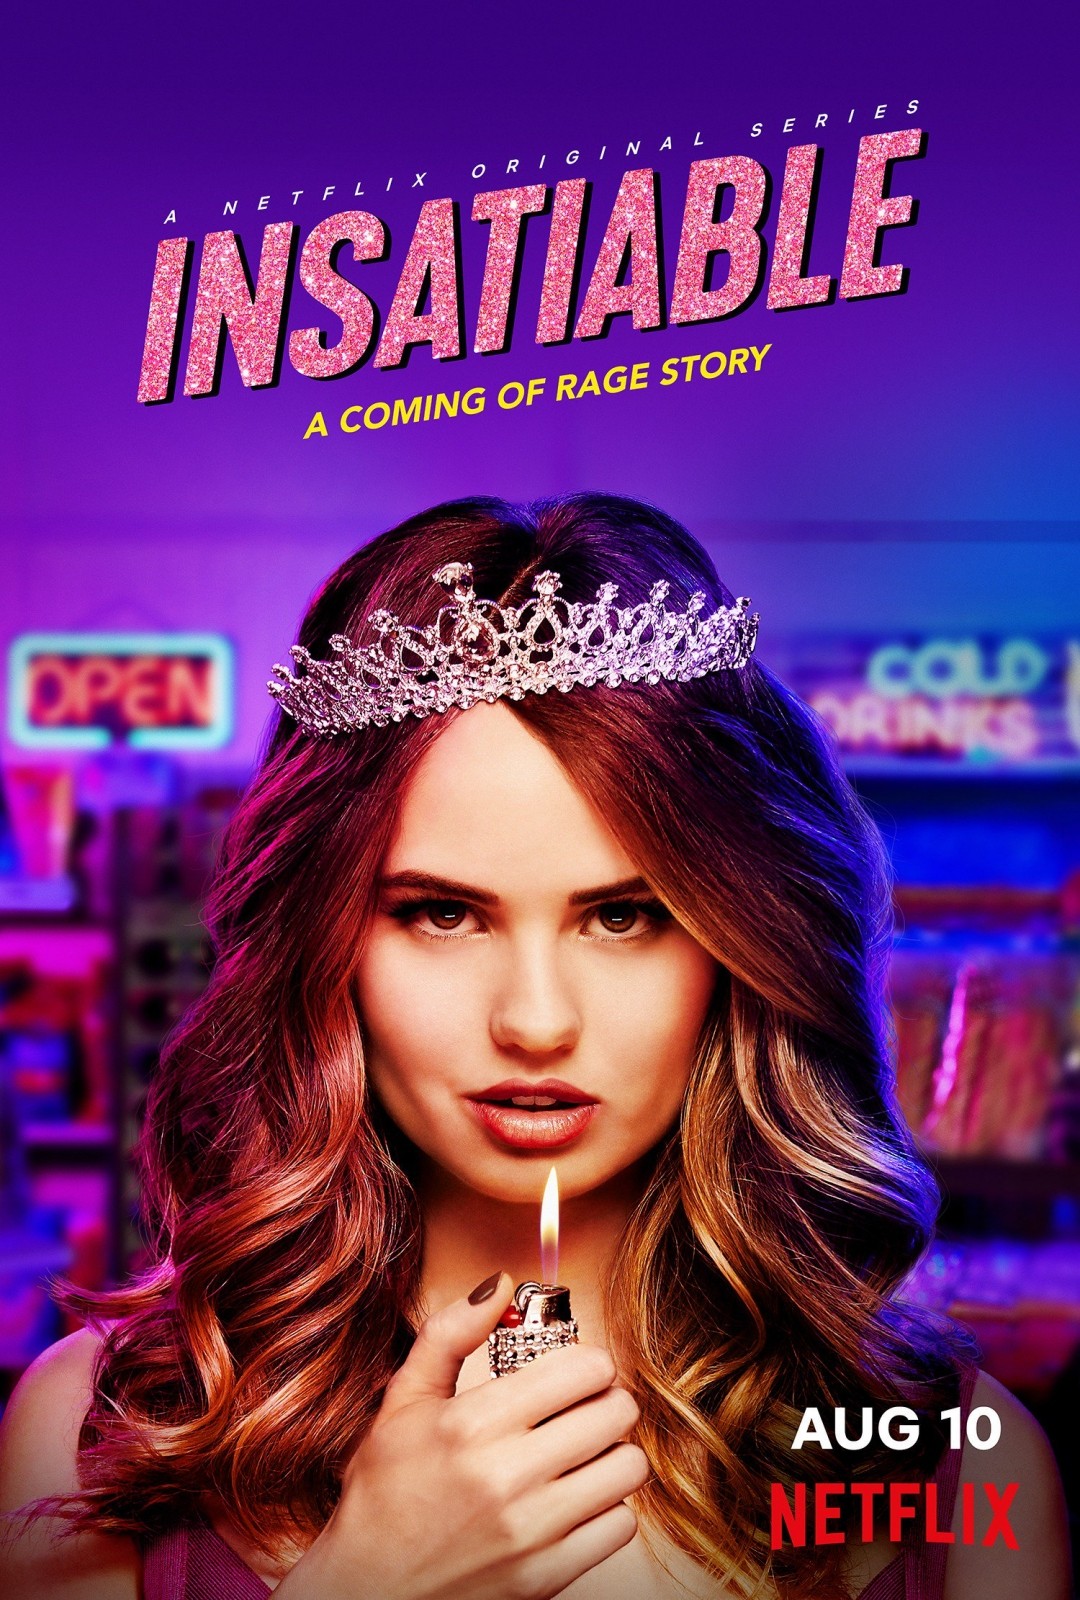 5 TV Shows To Binge Watch This November - Insatiable